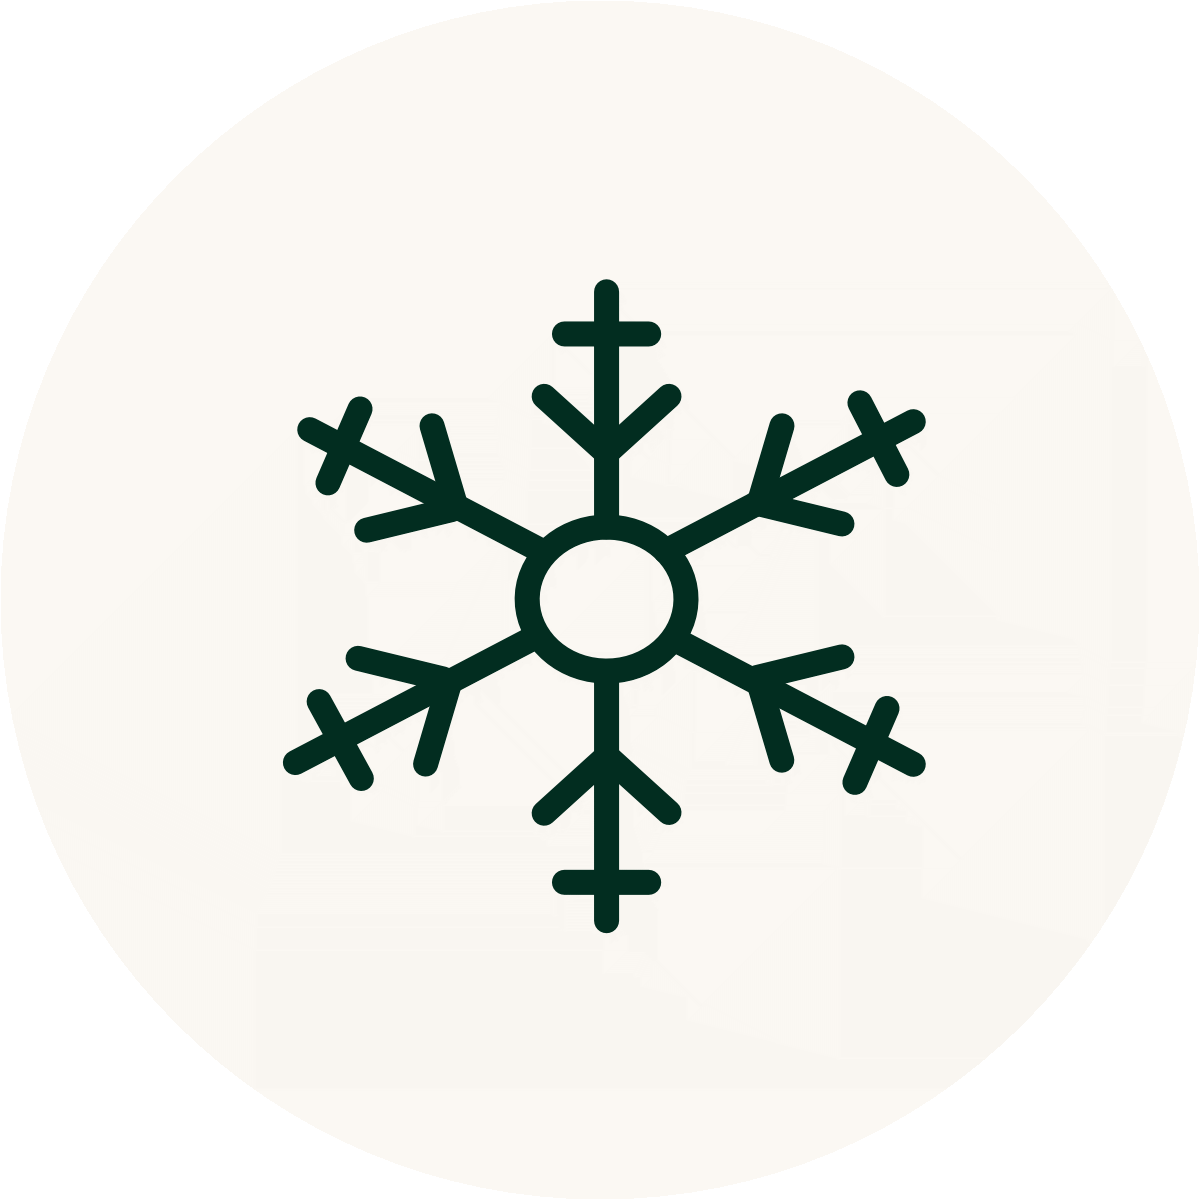 Clipart of a green snowflake.